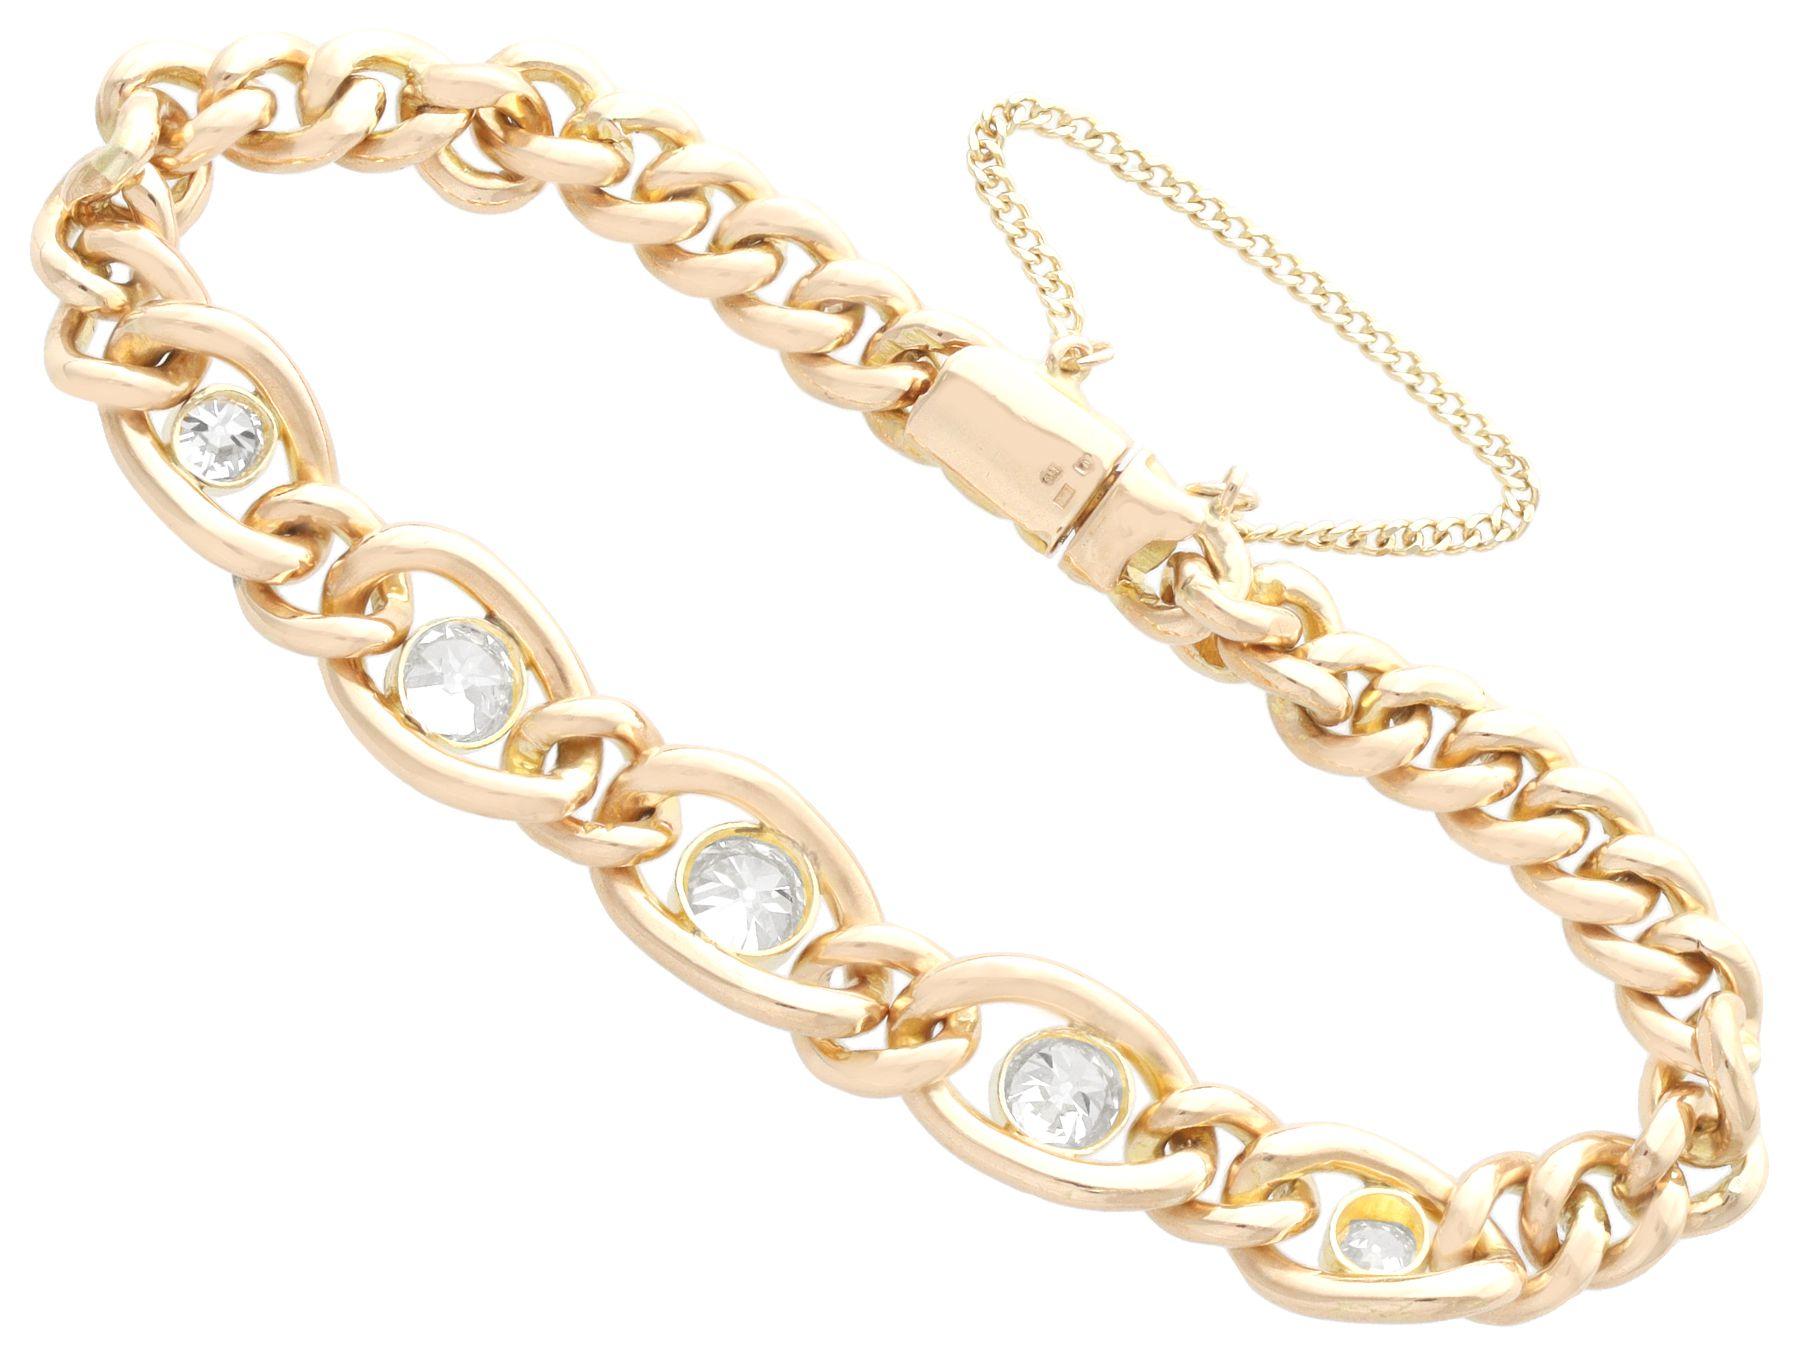 Antique 1.93 Carat Diamond and Yellow Gold Bracelet In Excellent Condition For Sale In Jesmond, Newcastle Upon Tyne